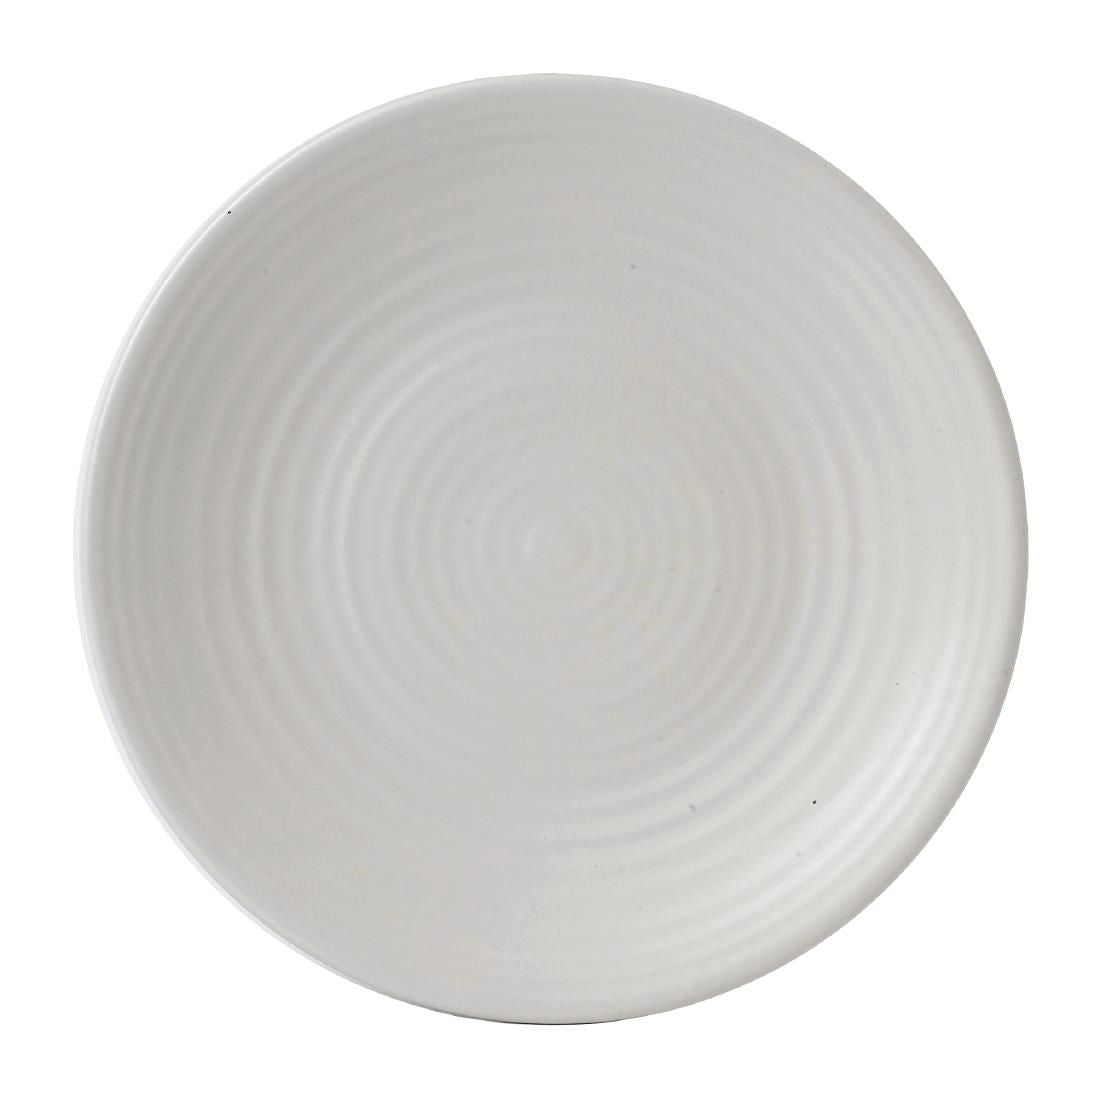 FE337 Dudson Evo Pearl Coupe Plate 203mm (Pack of 6) JD Catering Equipment Solutions Ltd